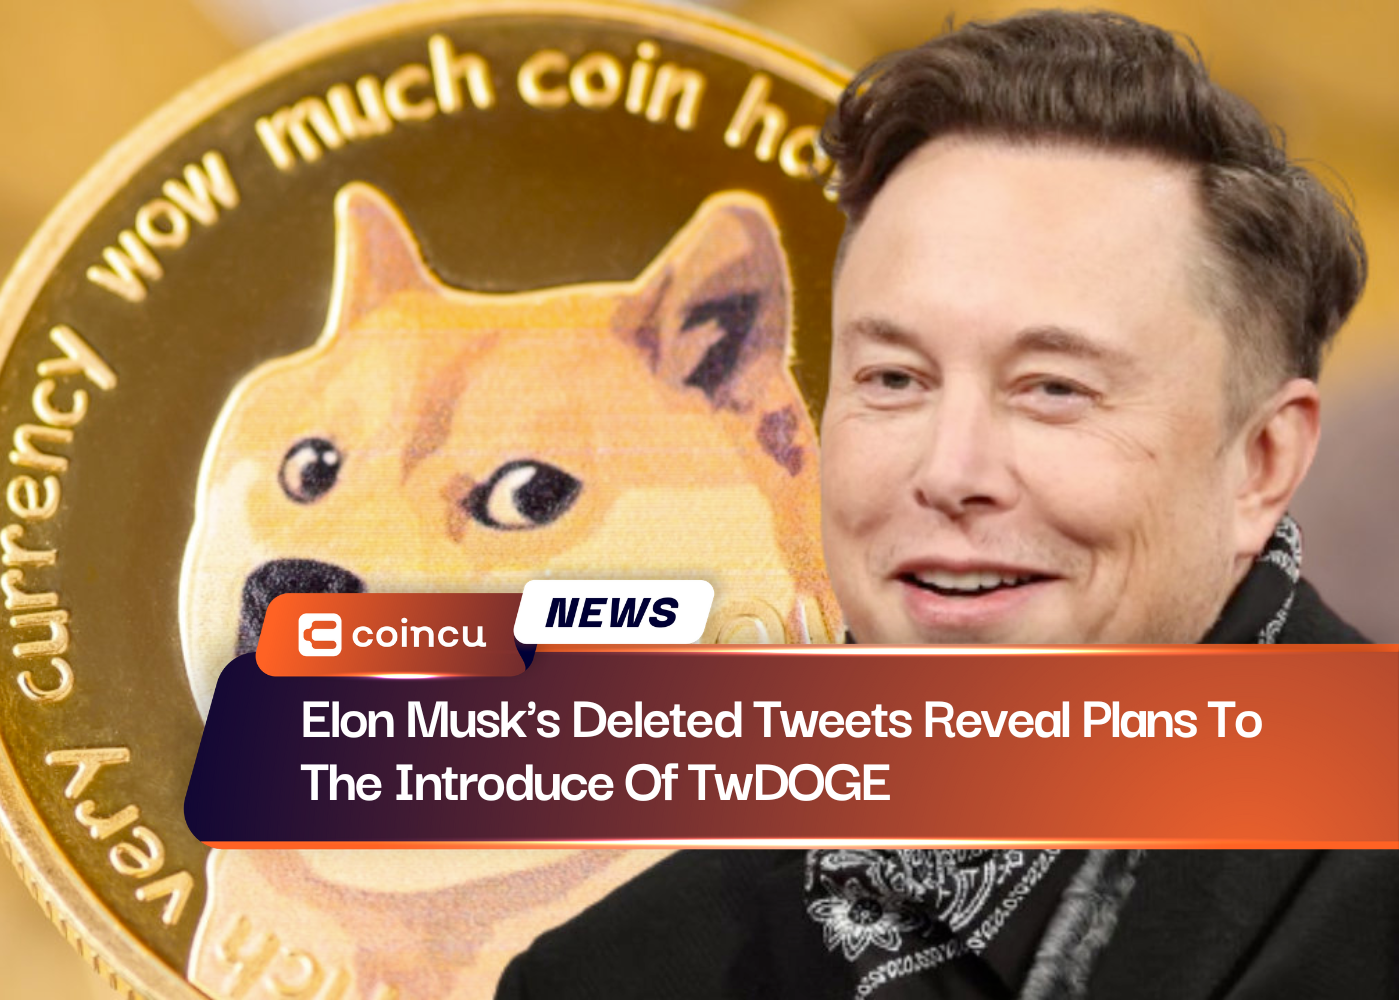 Elon Musk's Deleted Tweets Reveal Plans To The Introduce Of TwDOGE